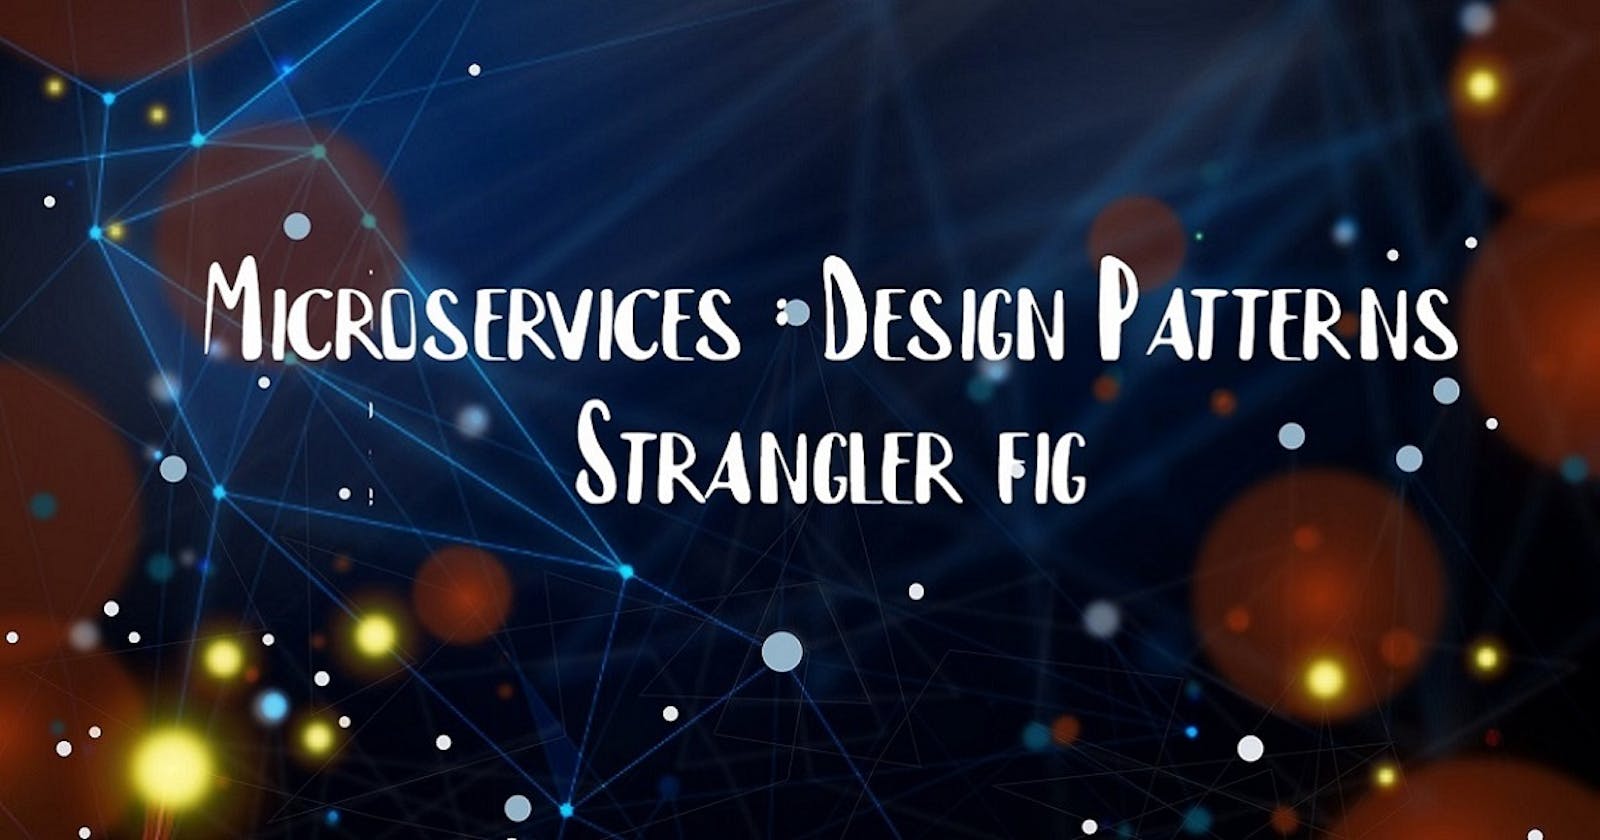 Microservices: Design patterns